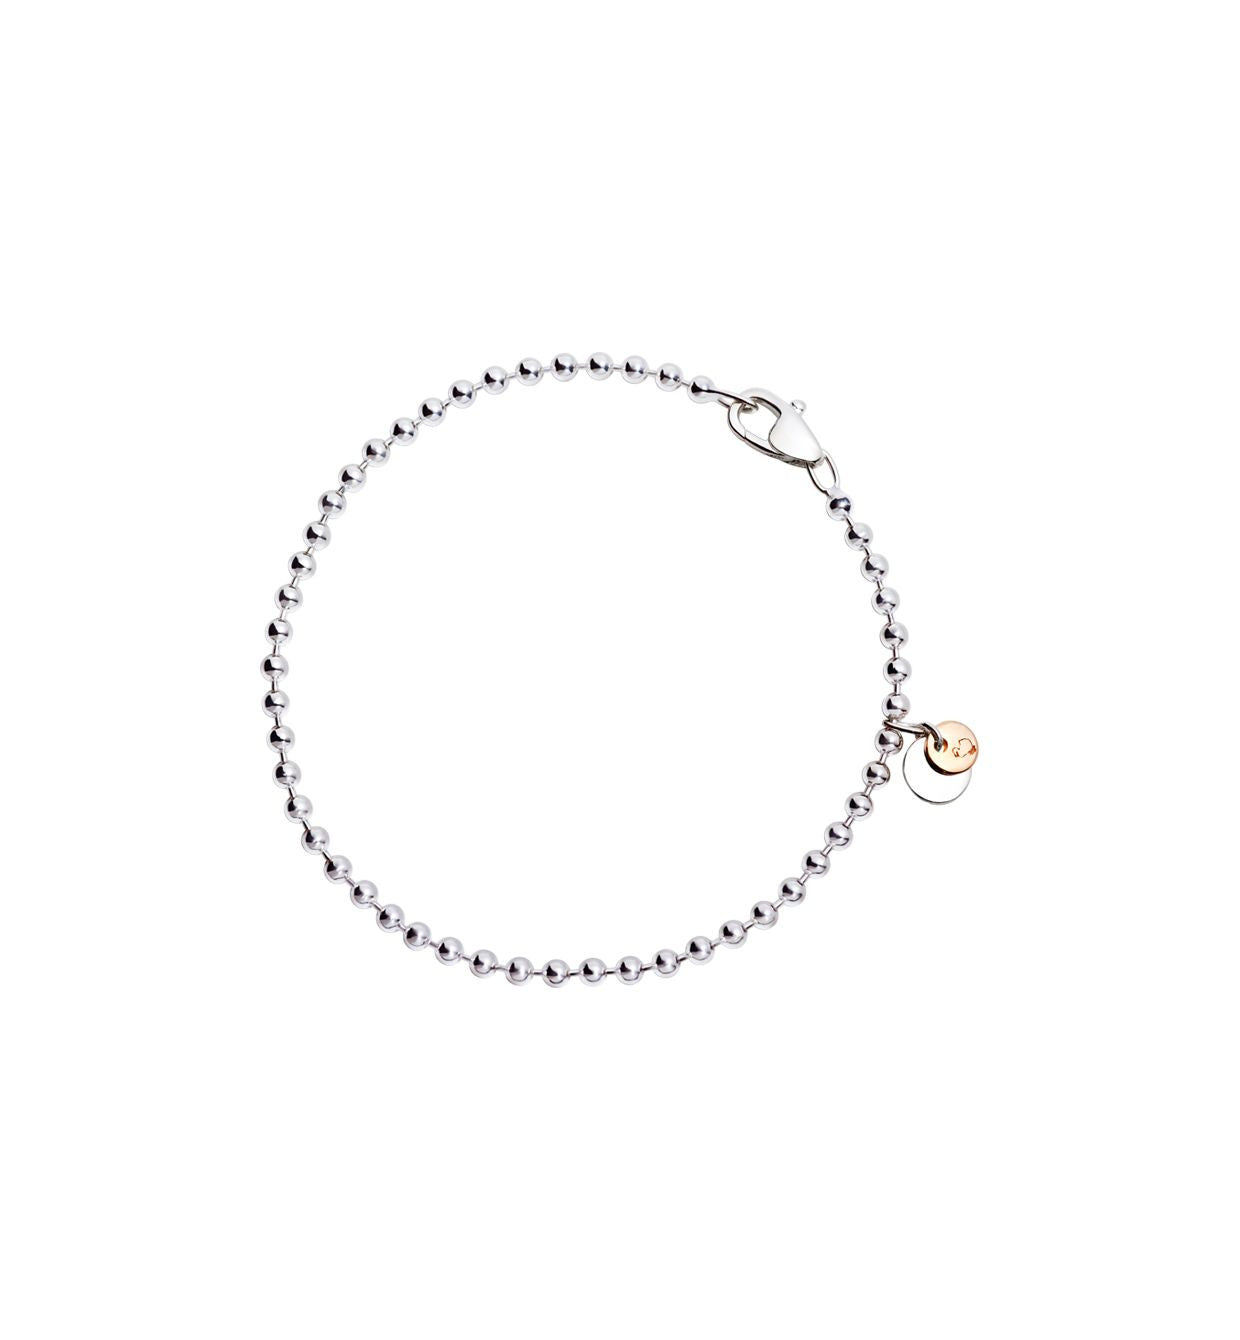 DoDo Bollicine Bracelet in Silver with Plaquettes in 9k Rose Gold and Silver - Orsini Jewellers NZ